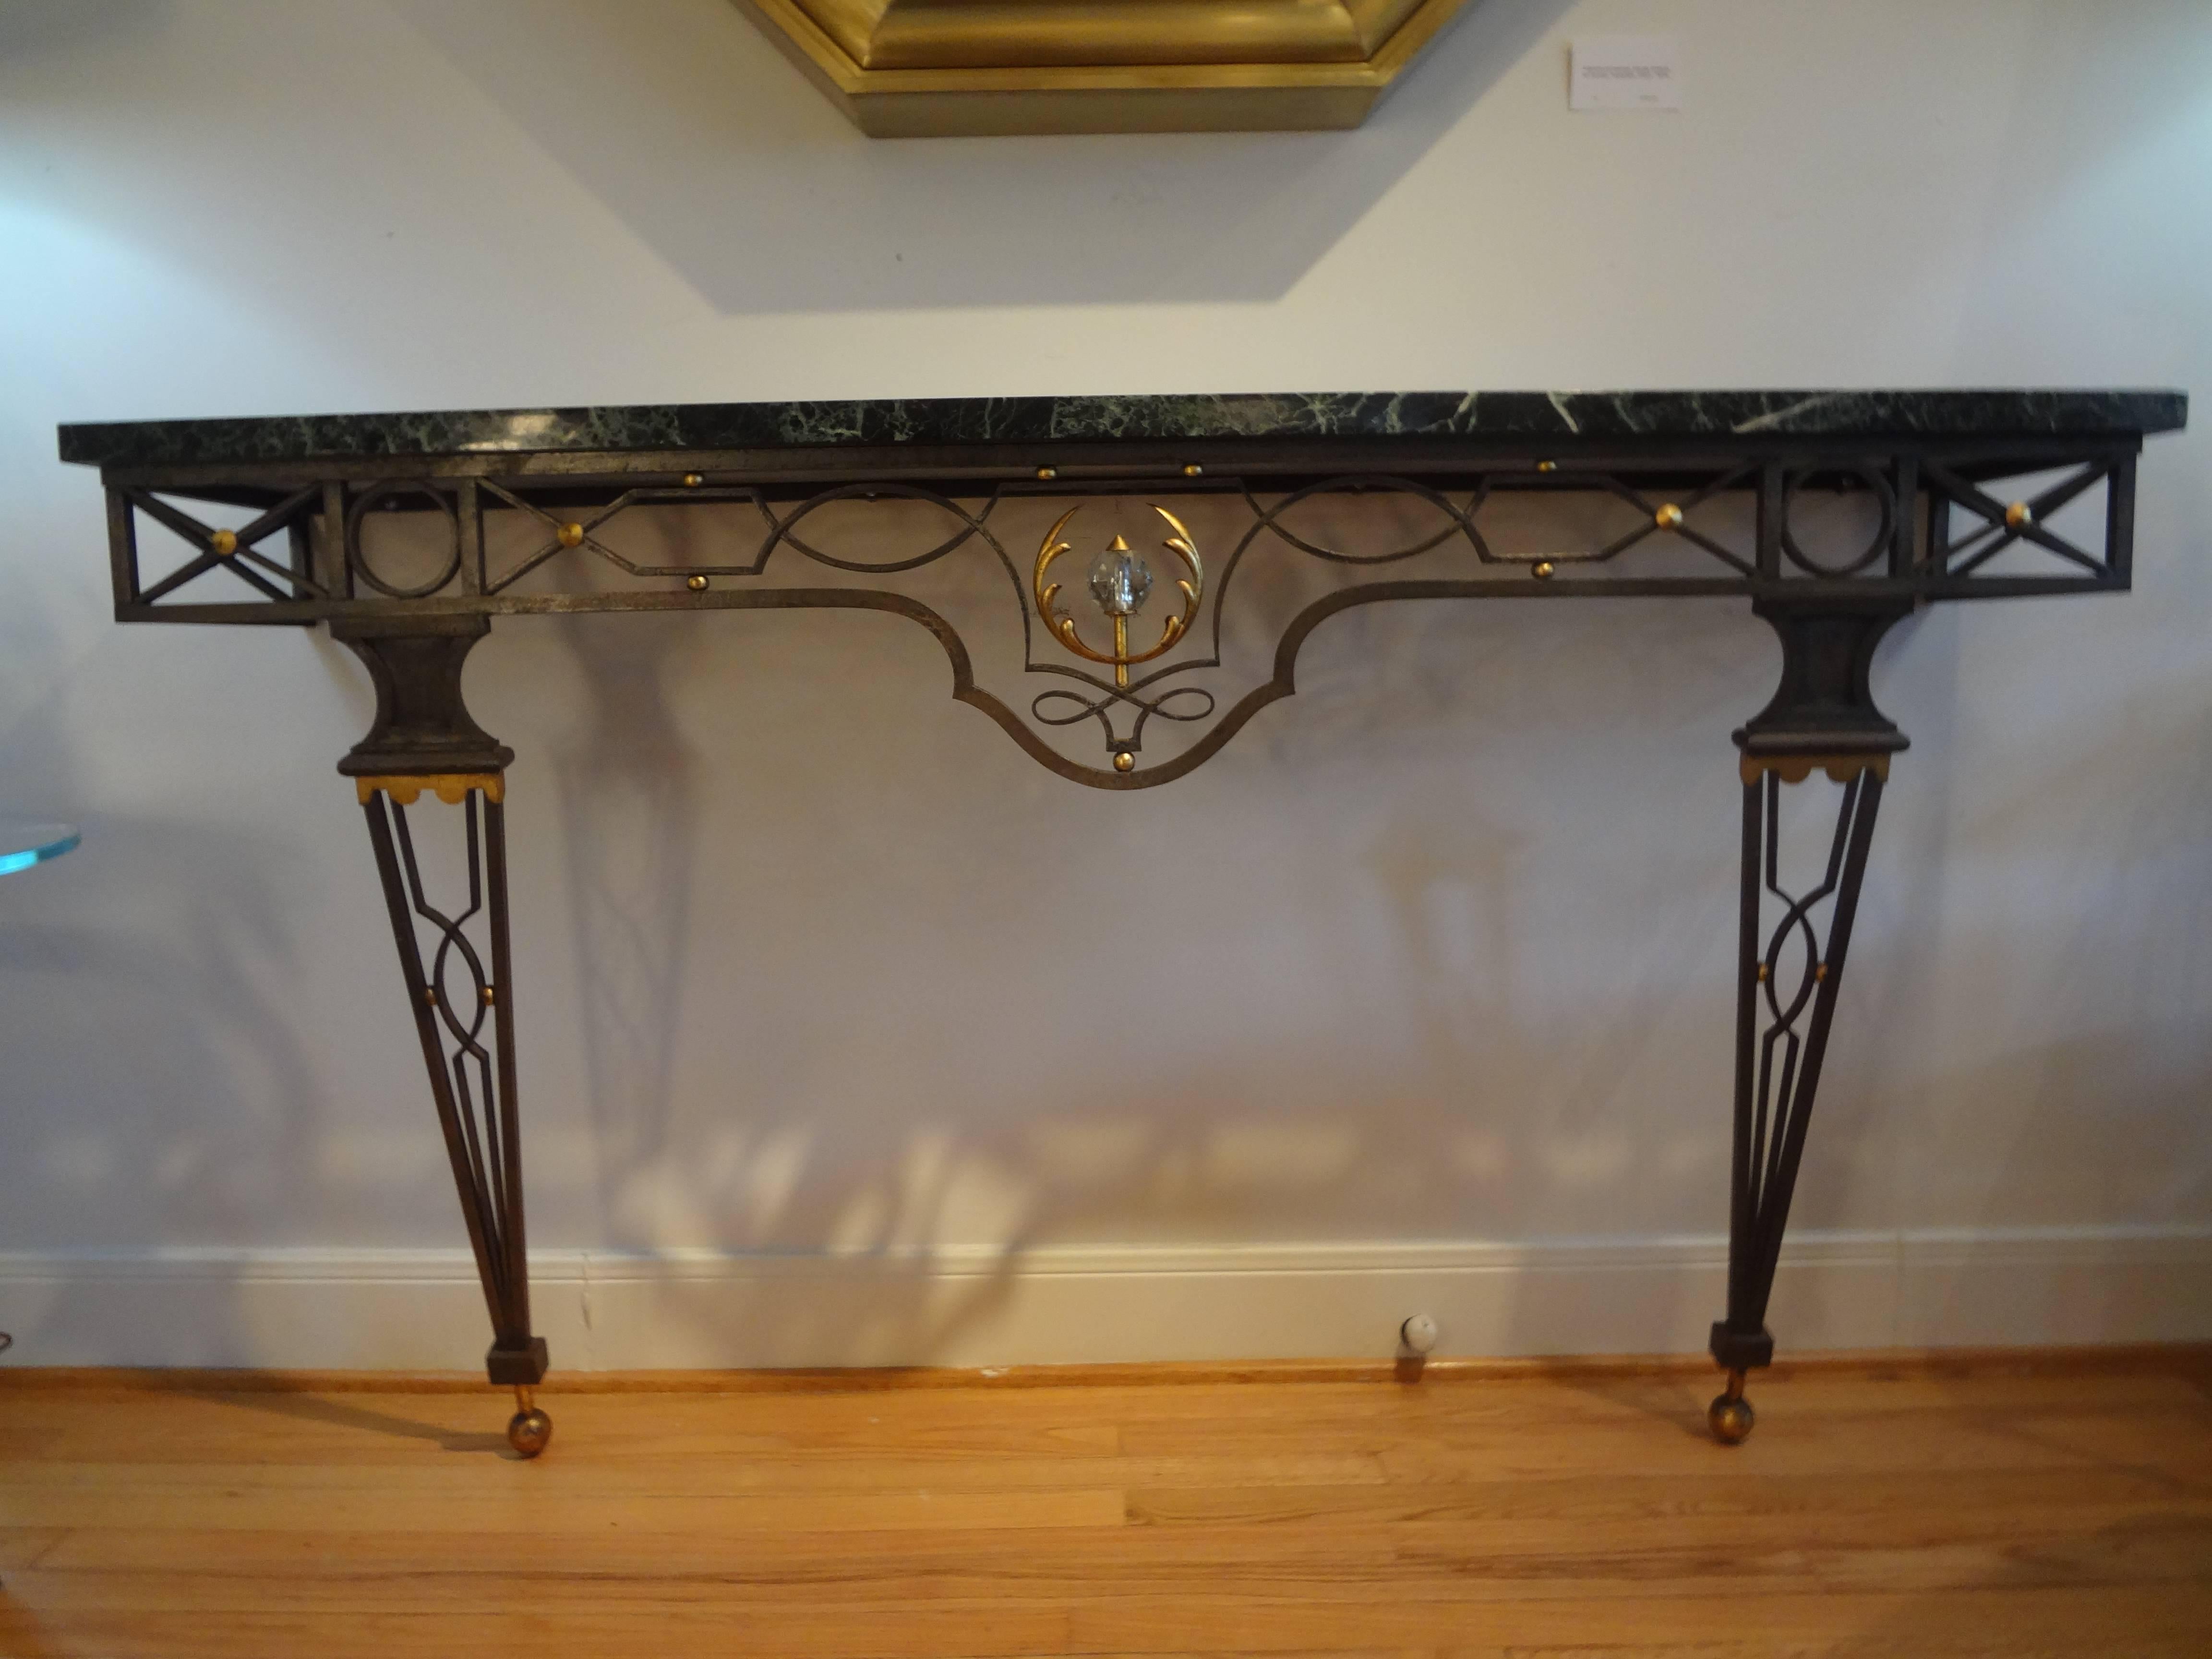 French neoclassical style wrought iron console table after Gilbert Poillerat. This large outstanding large French Neoclassical style wrought iron console table inspired by Gilbert Poillerat, 1940s.
This stunning large French console is wall-mounted